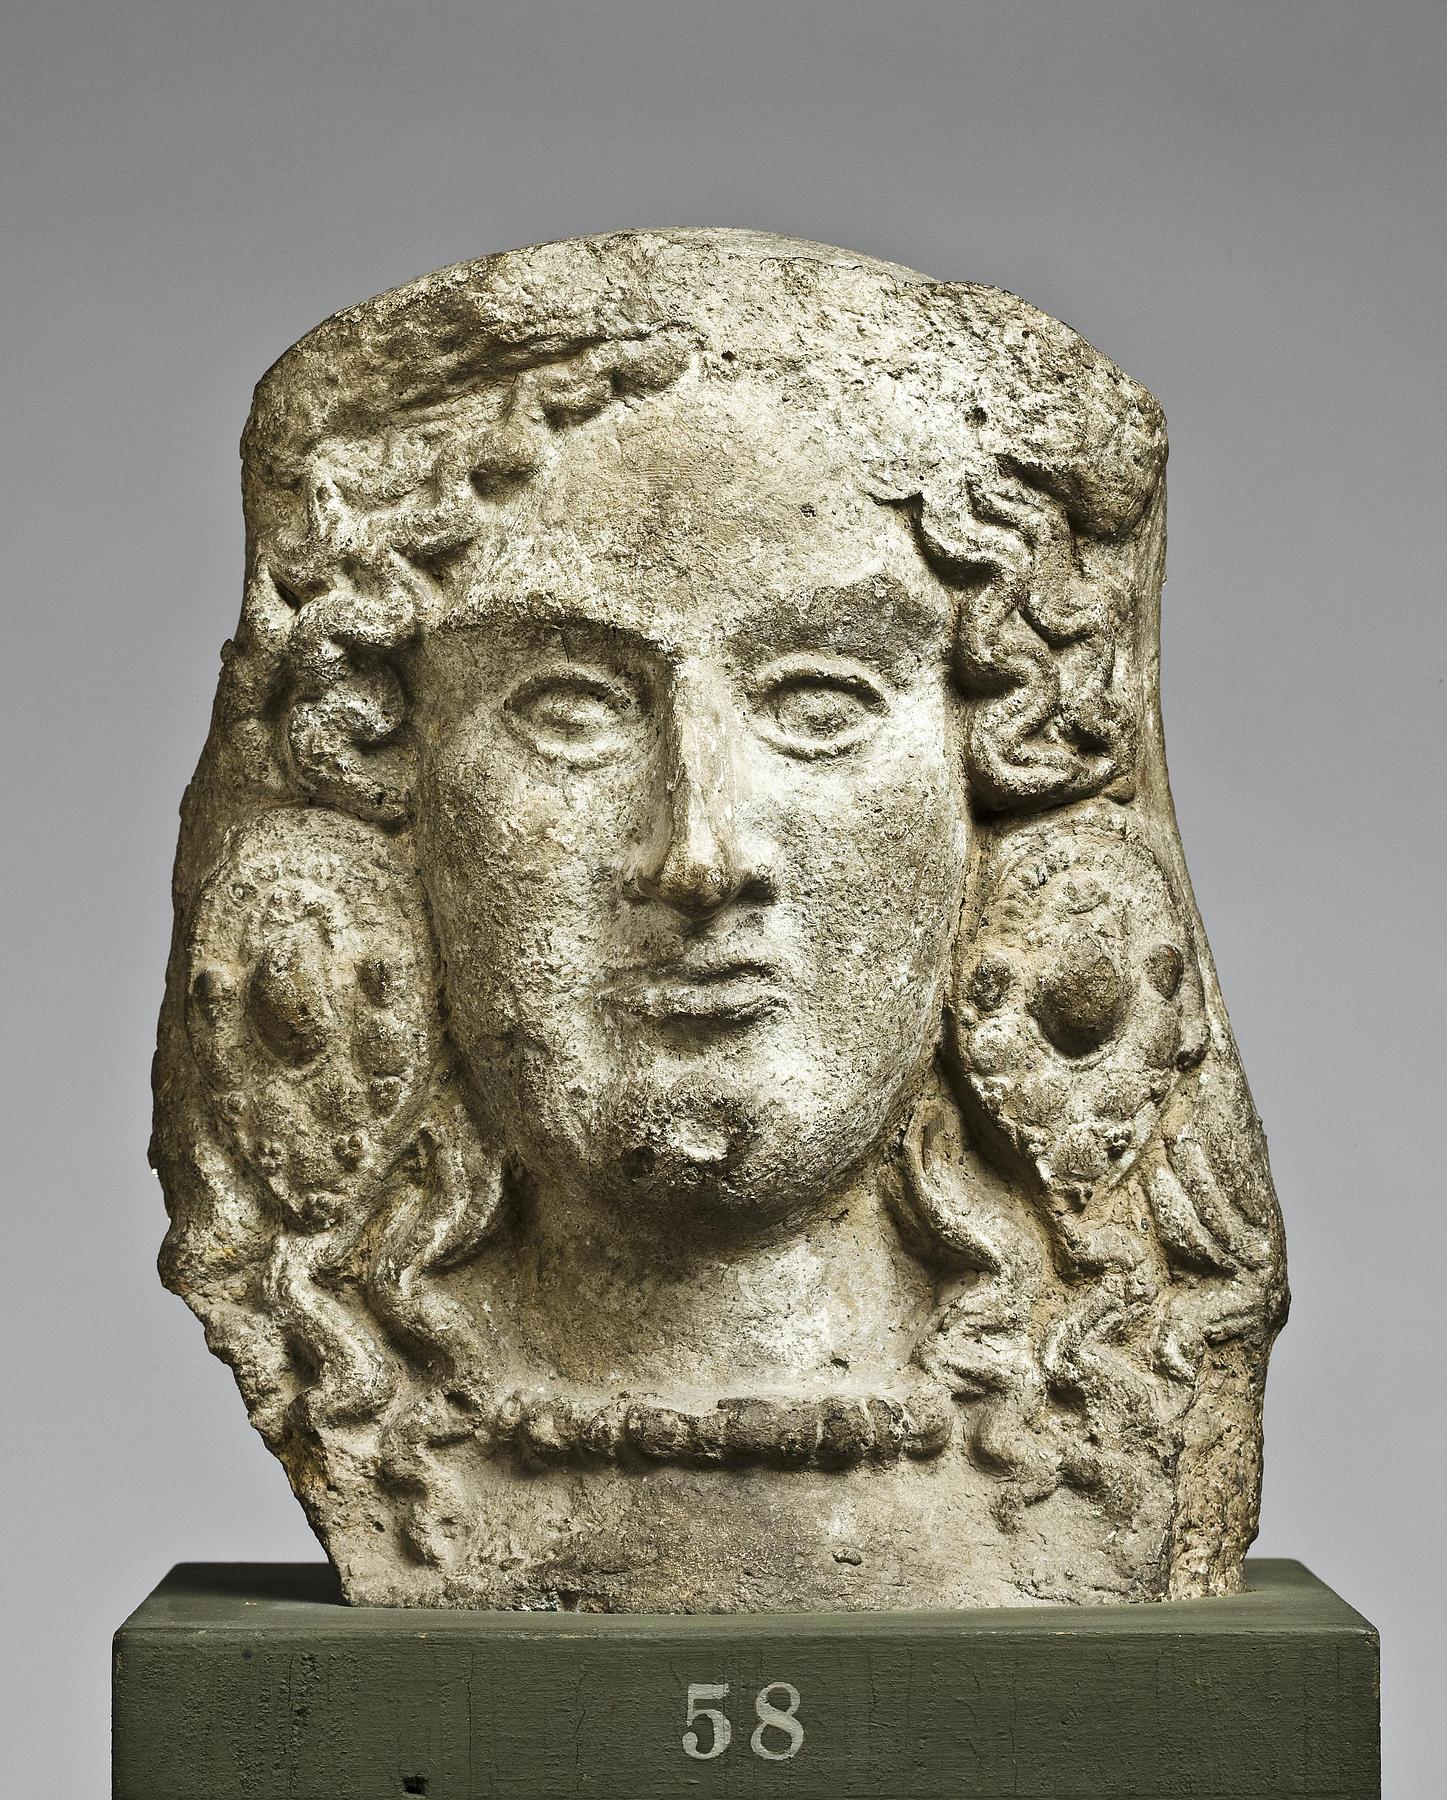 Antefix in the shape of a maenad's head, H1058